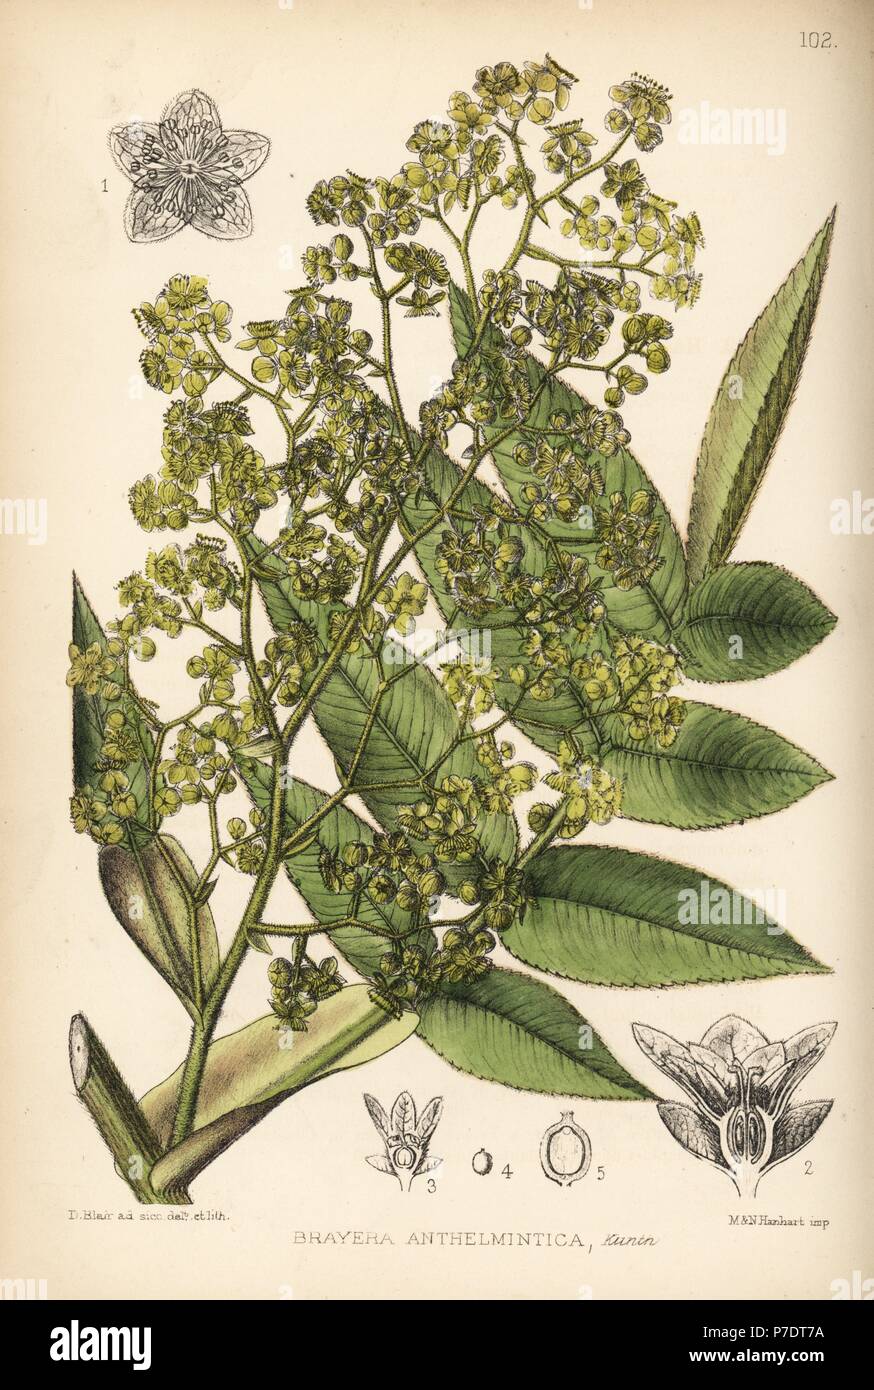 African redwood, kusso or koso, Hagenia abyssinica. Handcoloured lithograph by Hanhart after a botanical illustration by David Blair from Robert Bentley and Henry Trimen's Medicinal Plants, London, 1880. Stock Photo